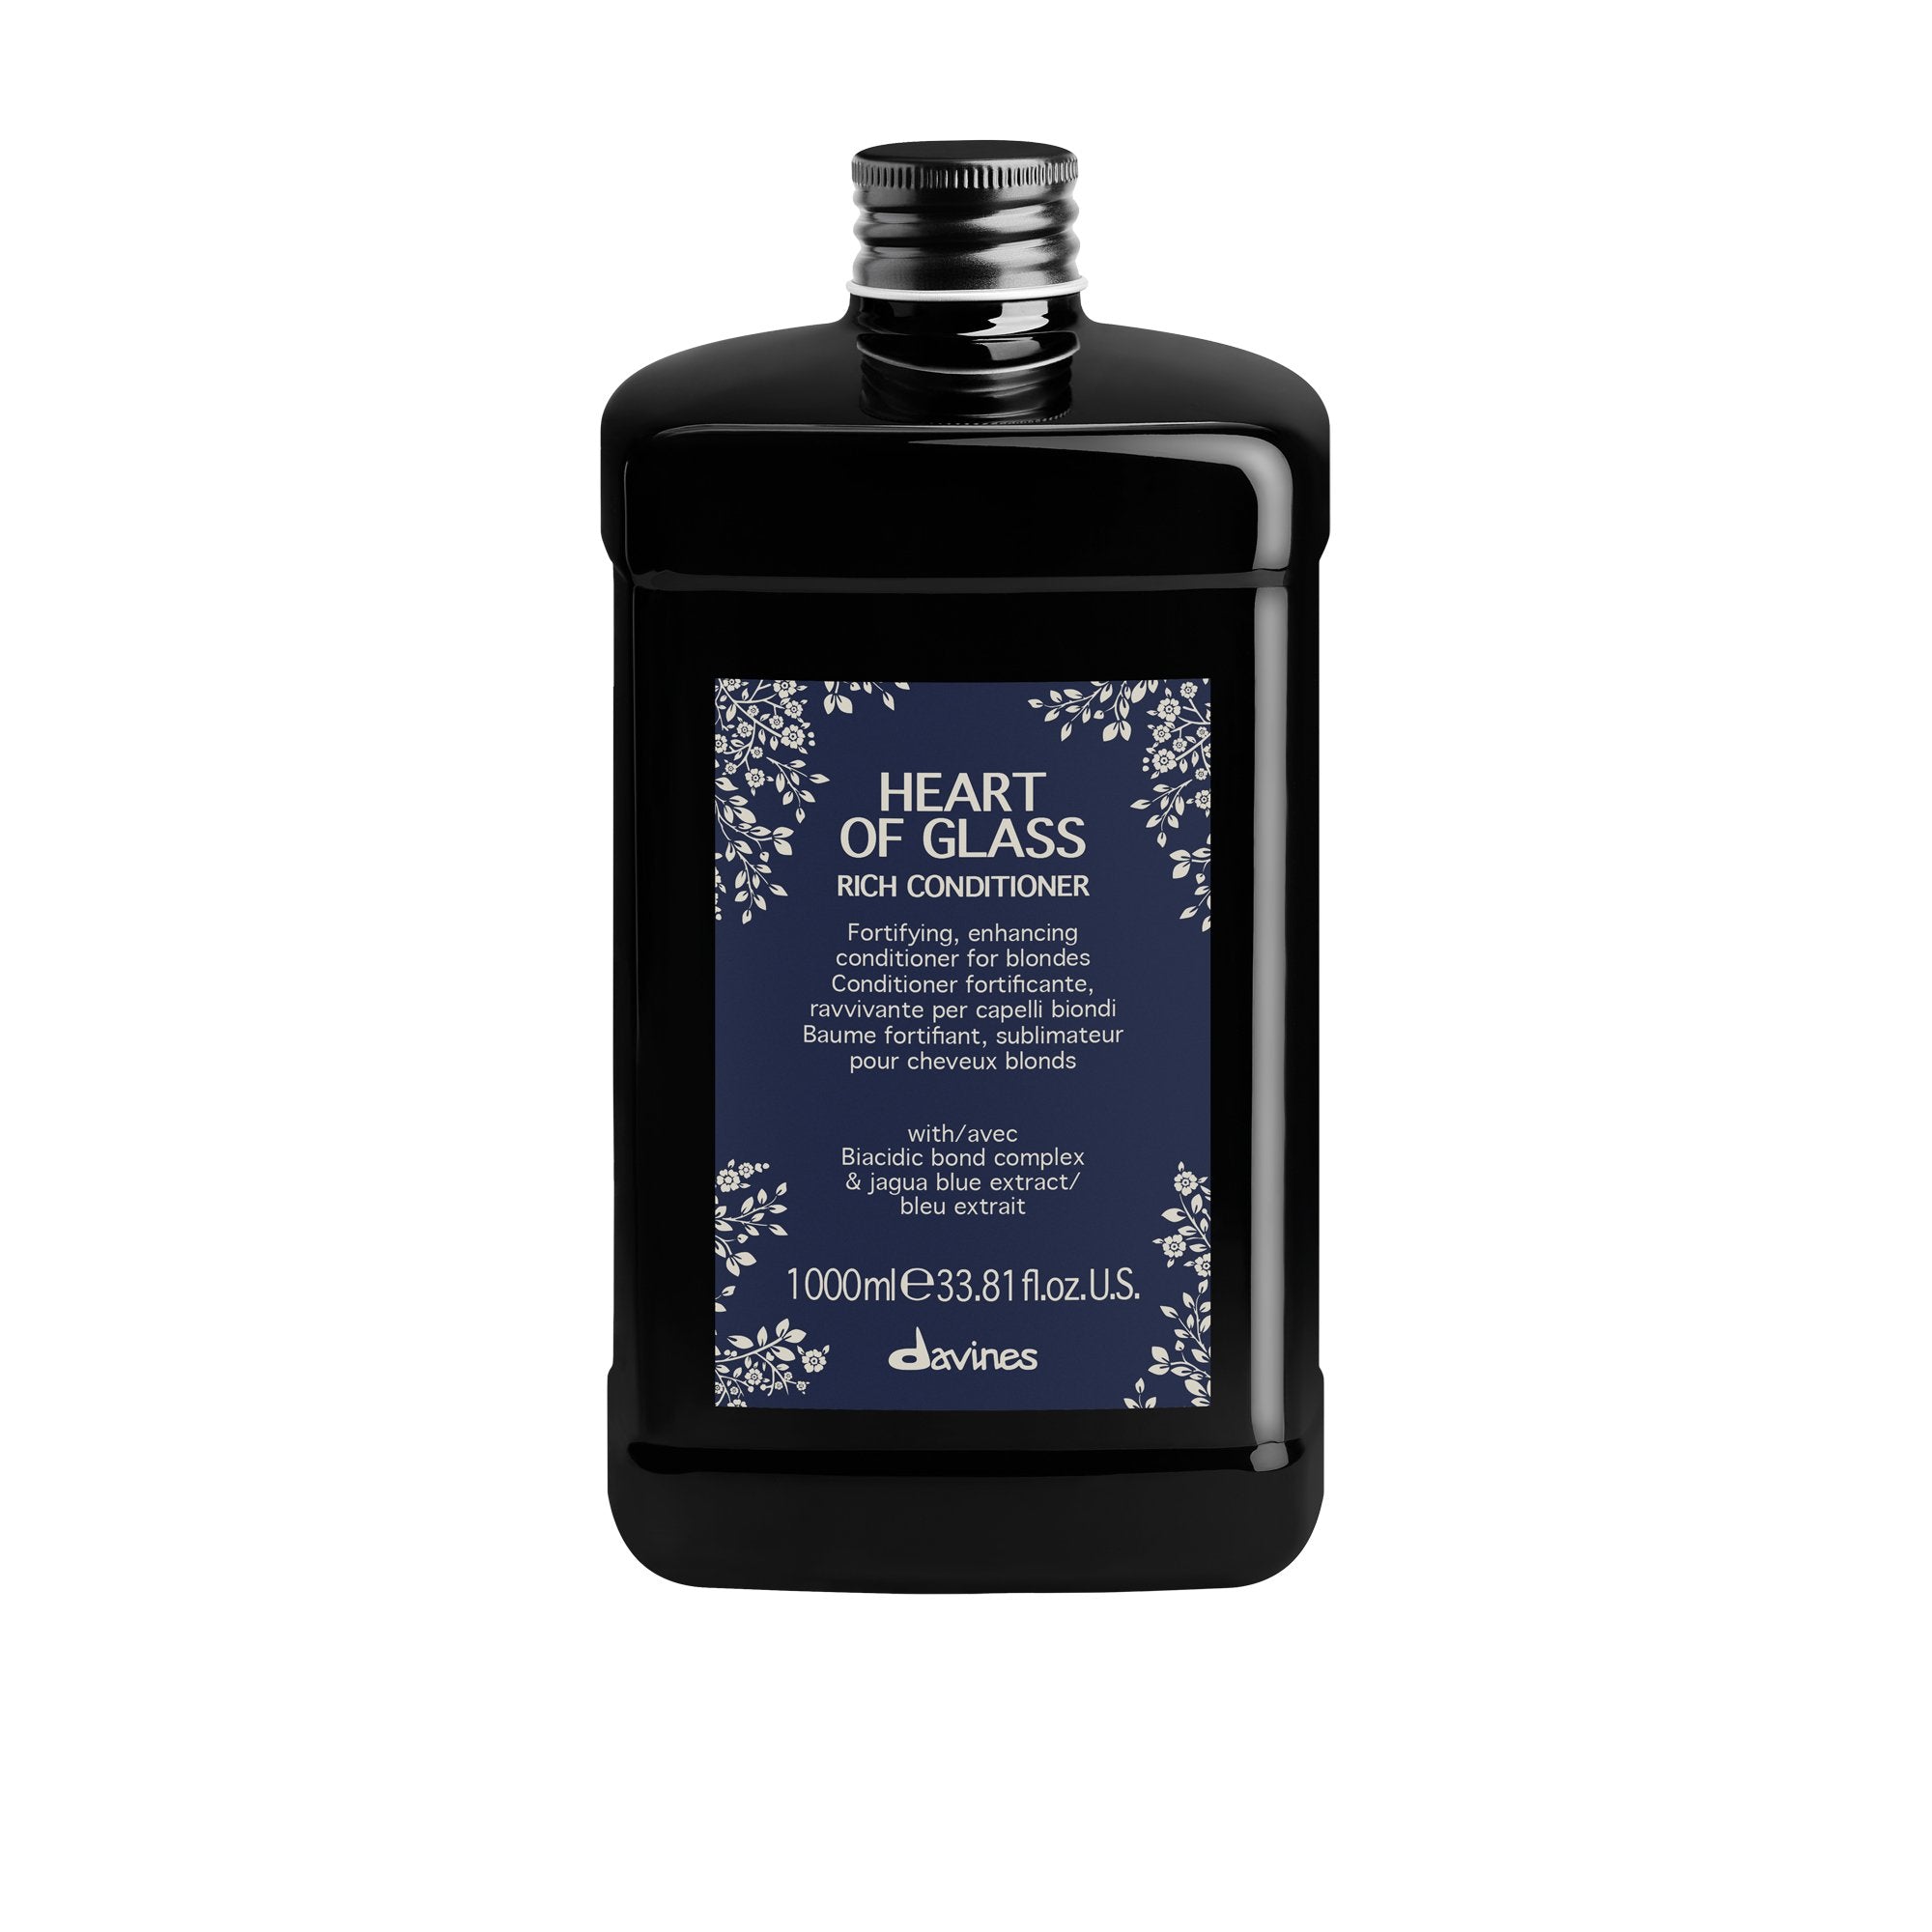 HEART OF GLASS Rich Conditioner